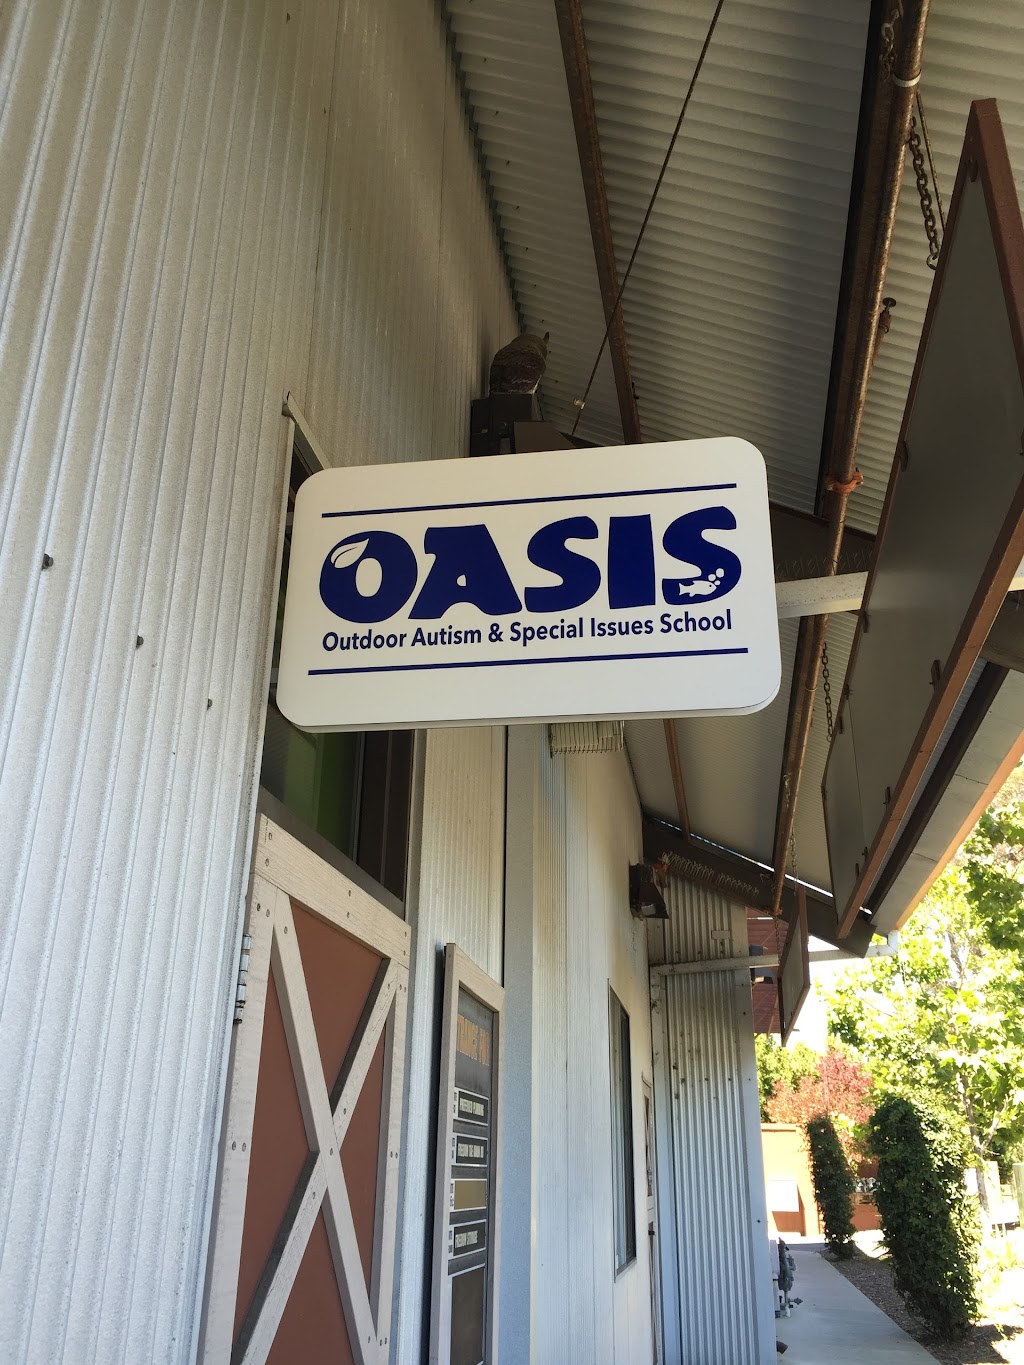 OASIS: Outdoor Autism & Special Issues School | 80 Airport Blvd # 206, Freedom, CA 95019 | Phone: (831) 687-9047